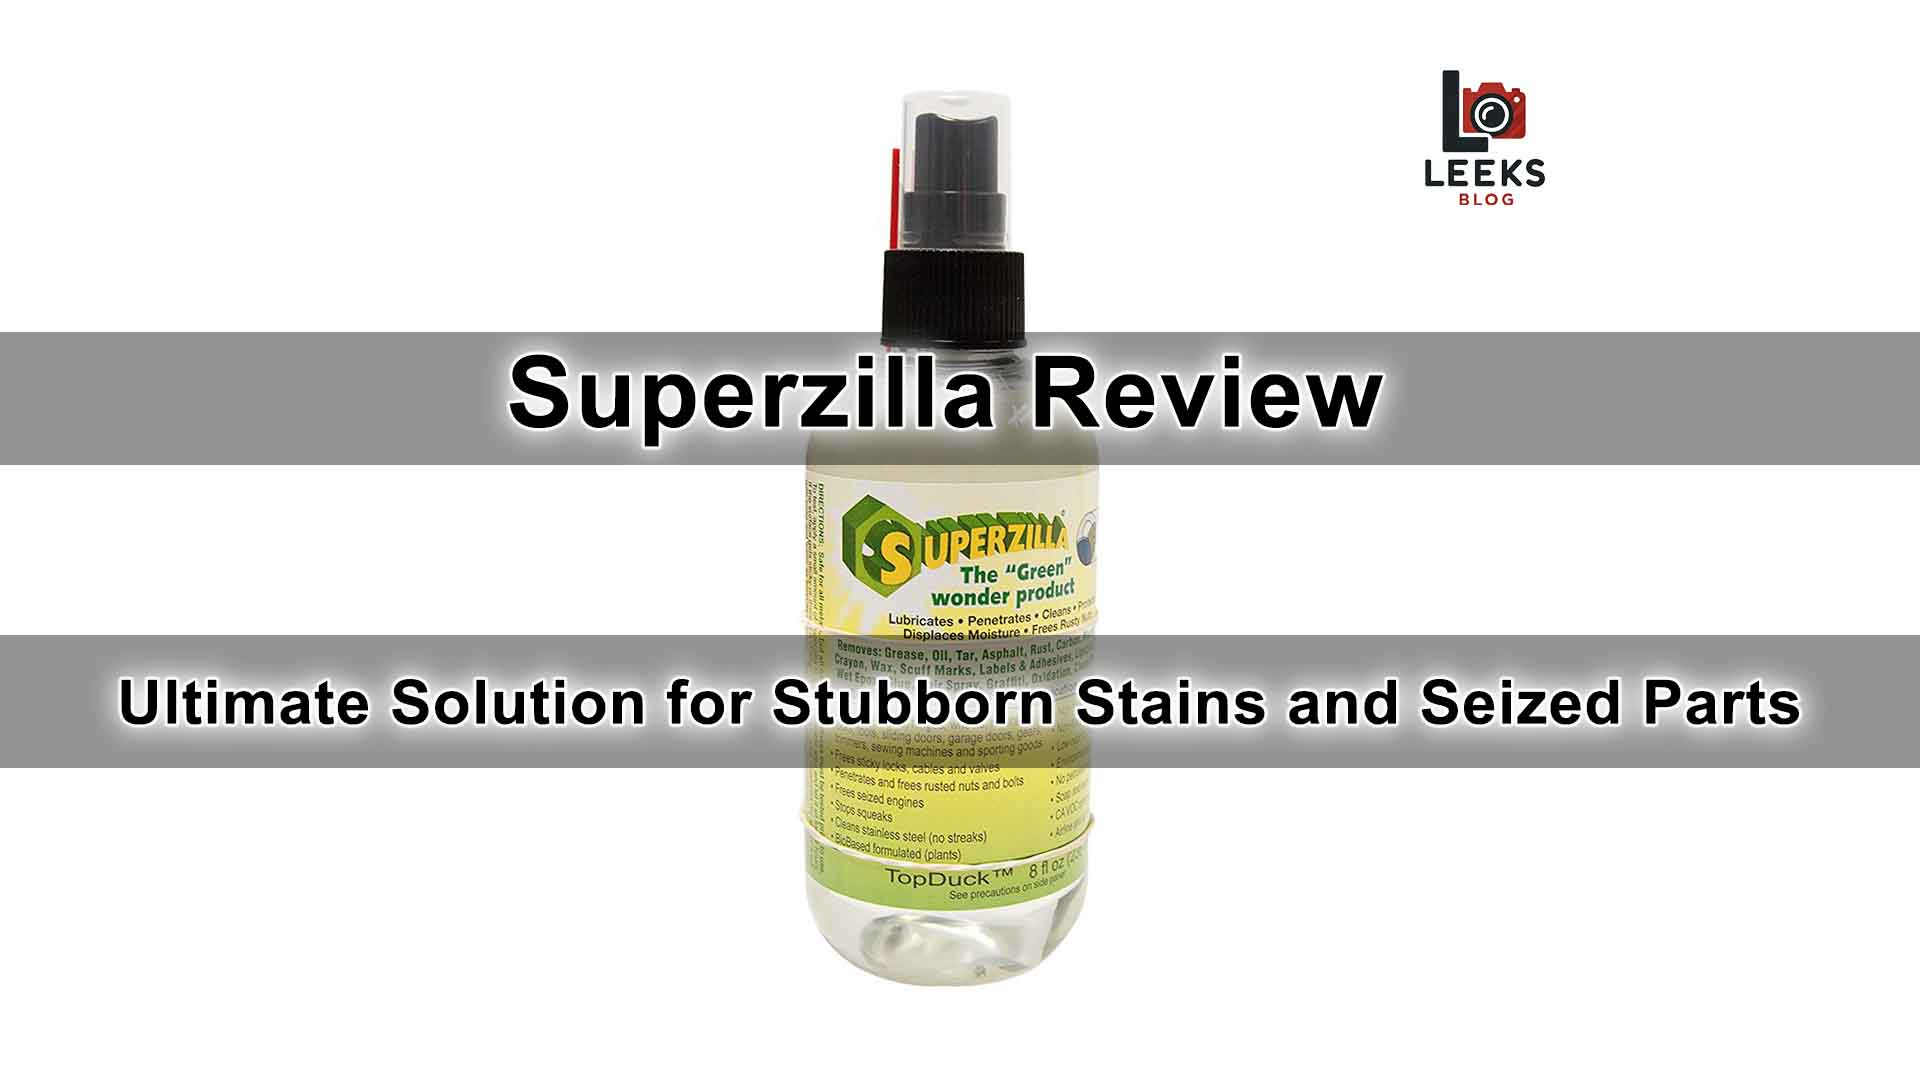 Superzilla Review: Ultimate Solution for Stubborn Stains and Seized Parts